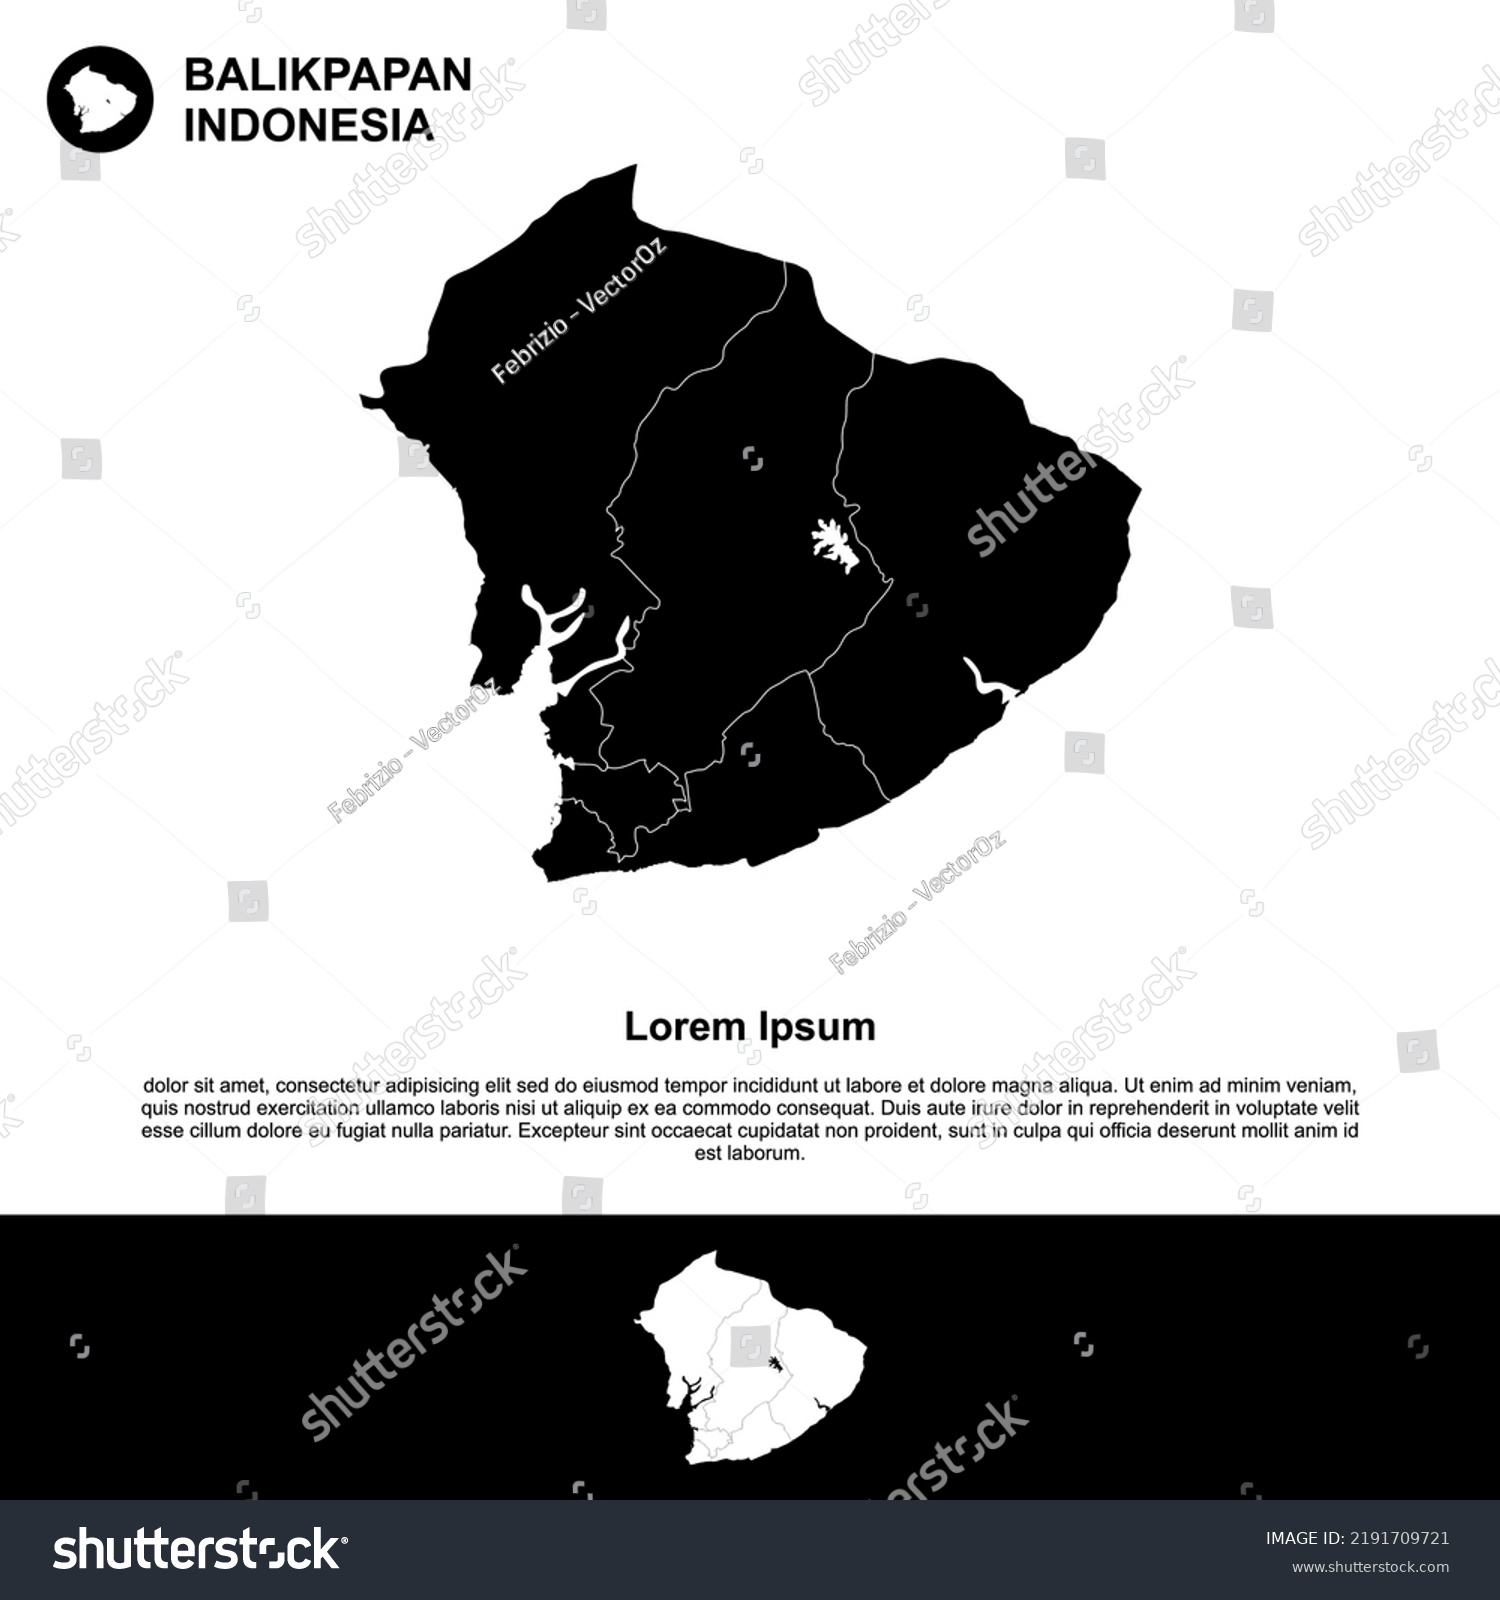 Stock Vector A Map Of One Of The Provinces Or City In Indonesia Balikpapan In East Kalimantan One Of The Big 2191709721 